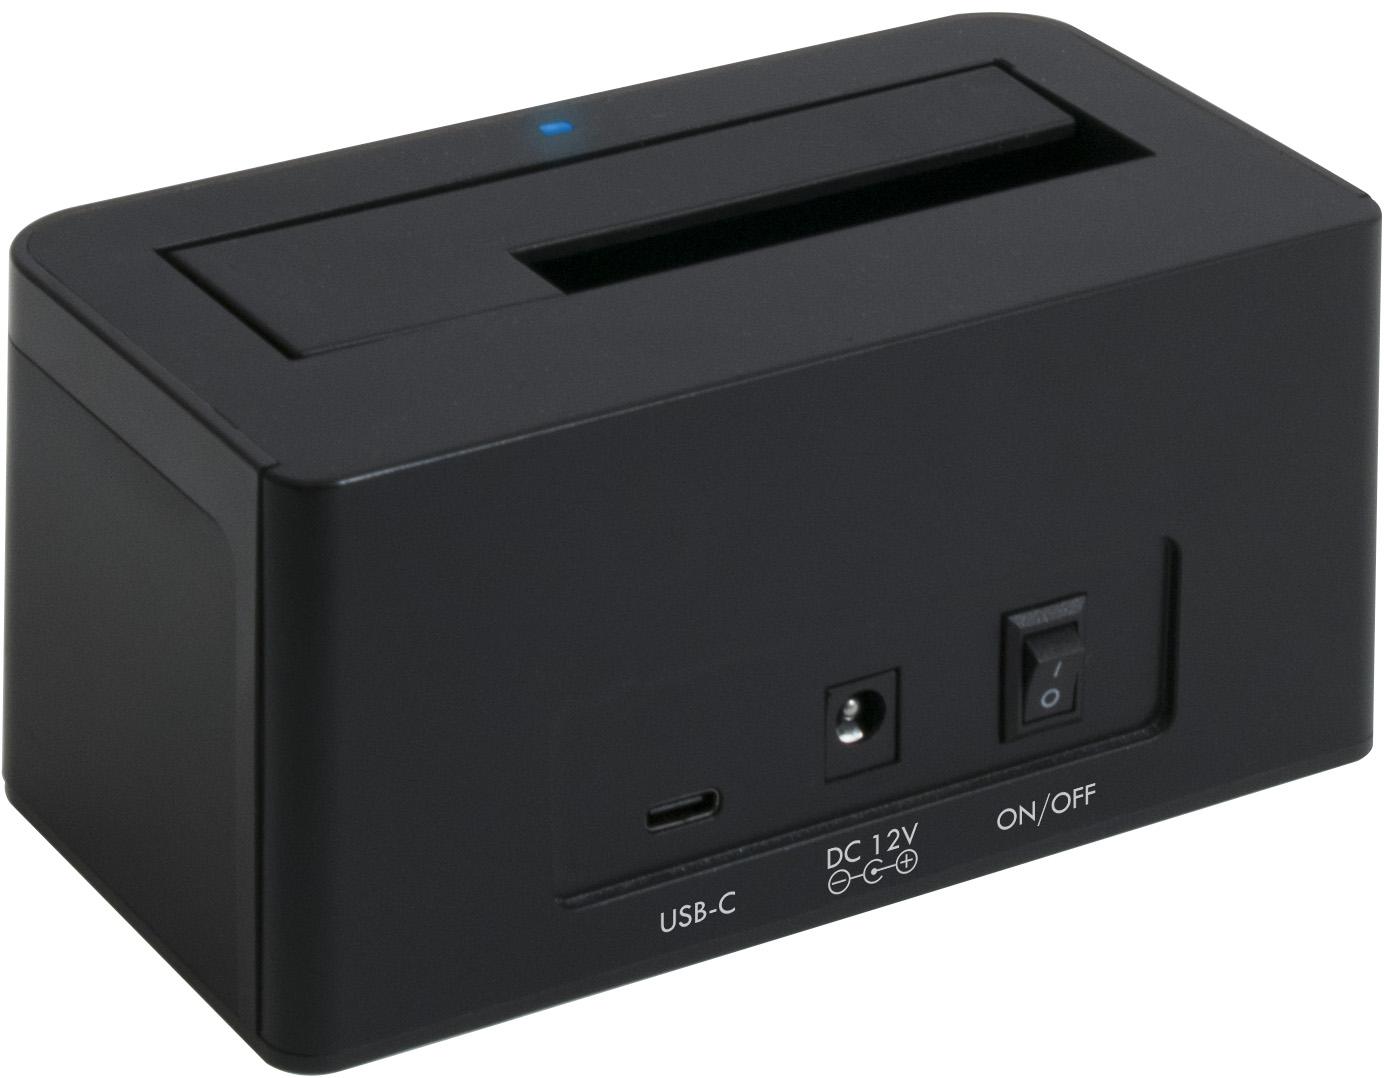 Plugable USB 3.1 Gen 2 10Gbps SATA Upright Hard Drive Dock and SSD Dock (includes both USB-C and USB 3.0 cables, supports 10TB+ drives) - image 2 of 6